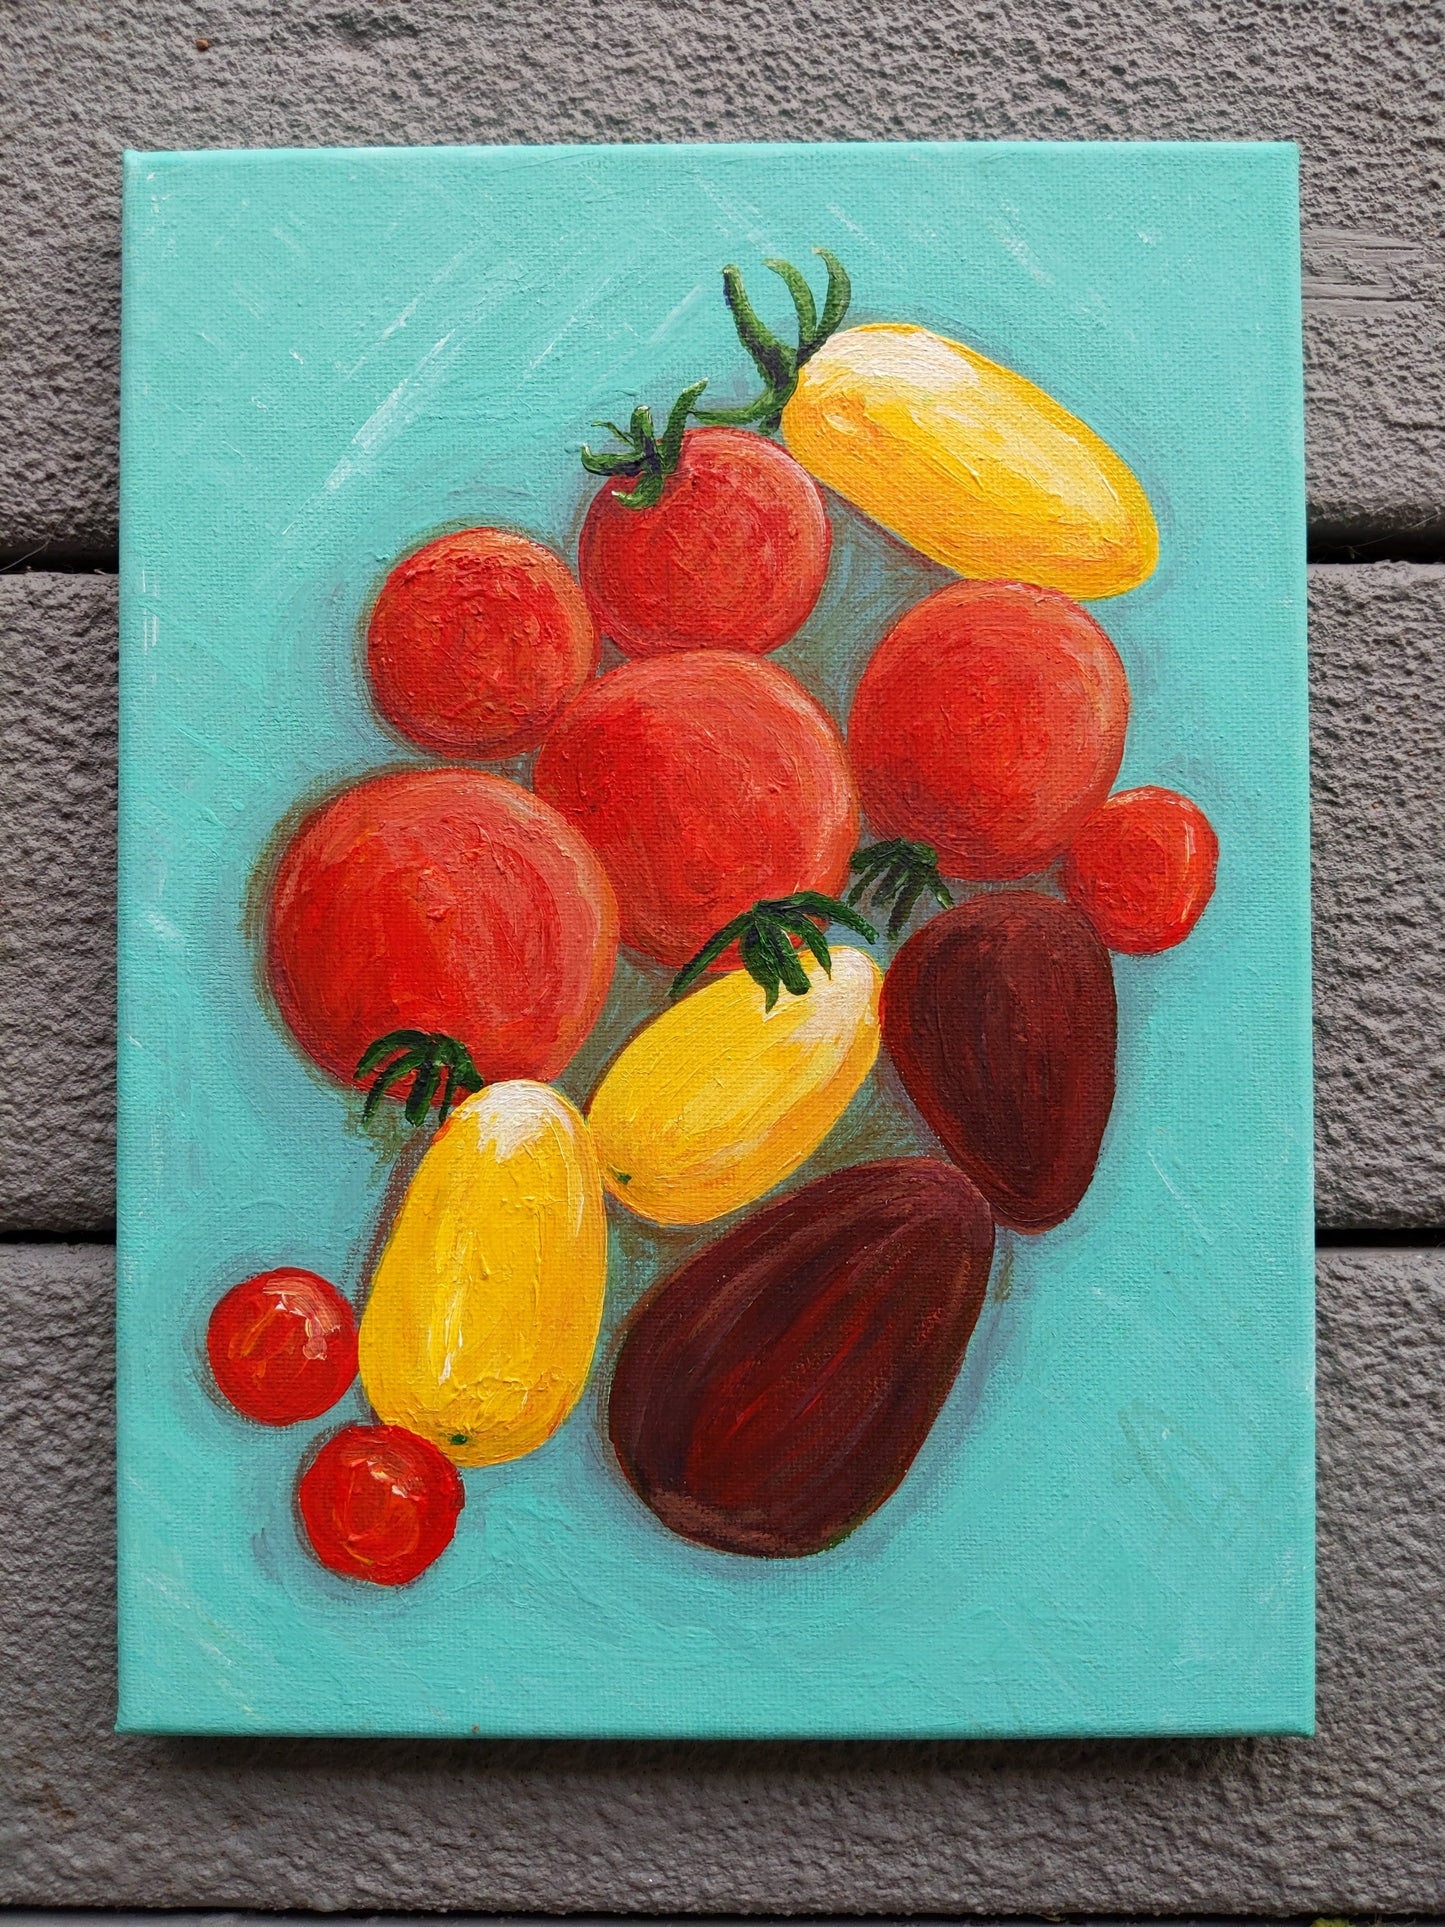 Garden tomatoes | 9X12 canvas painting